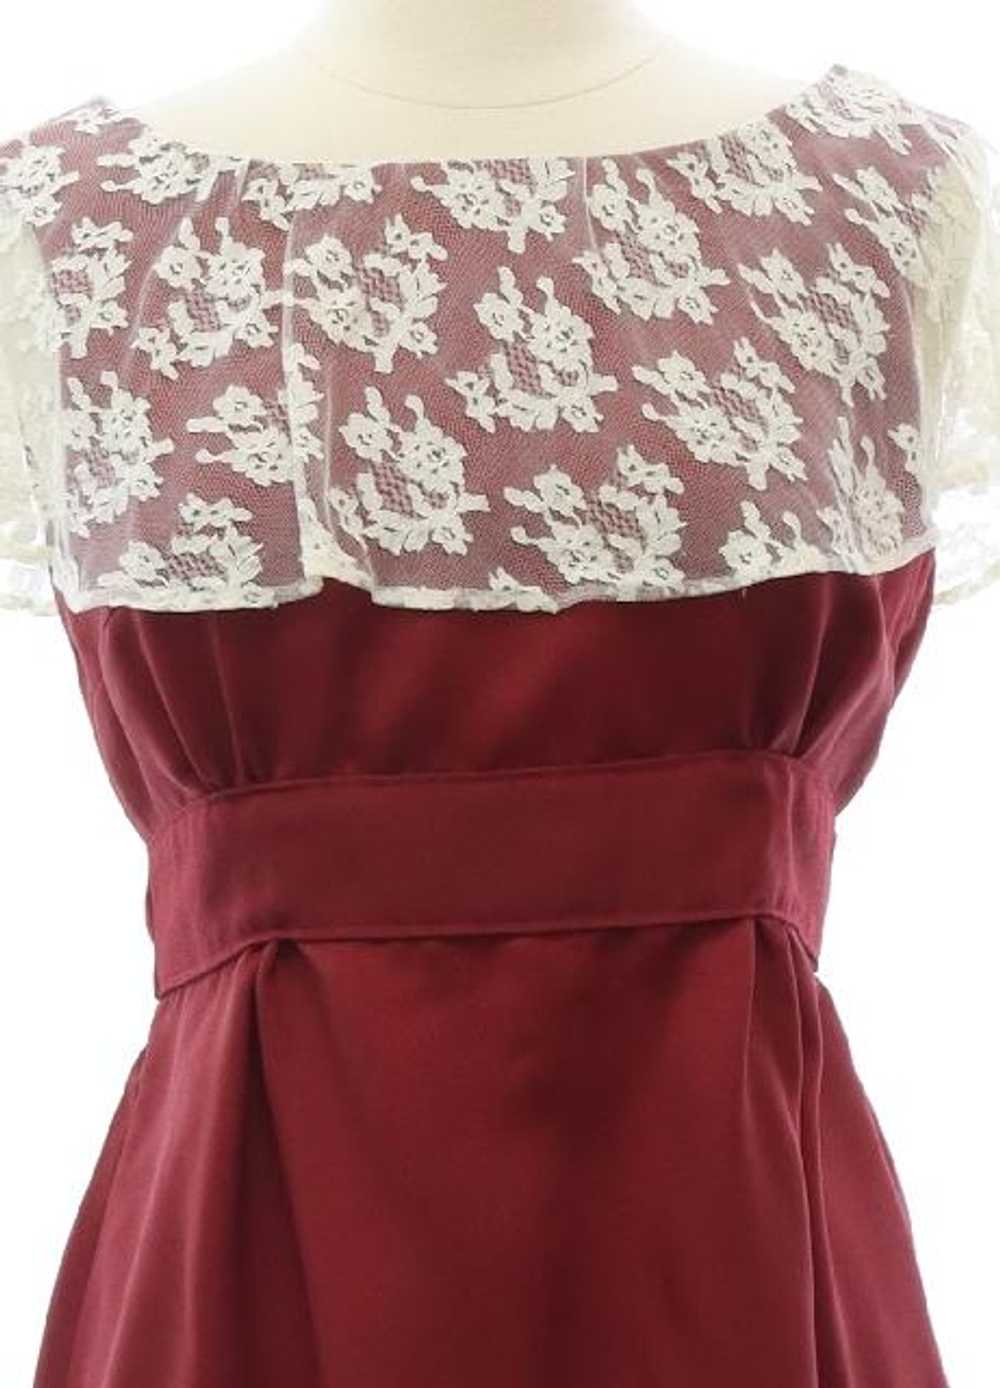 1970's Prom Or Cocktail Dress - image 2